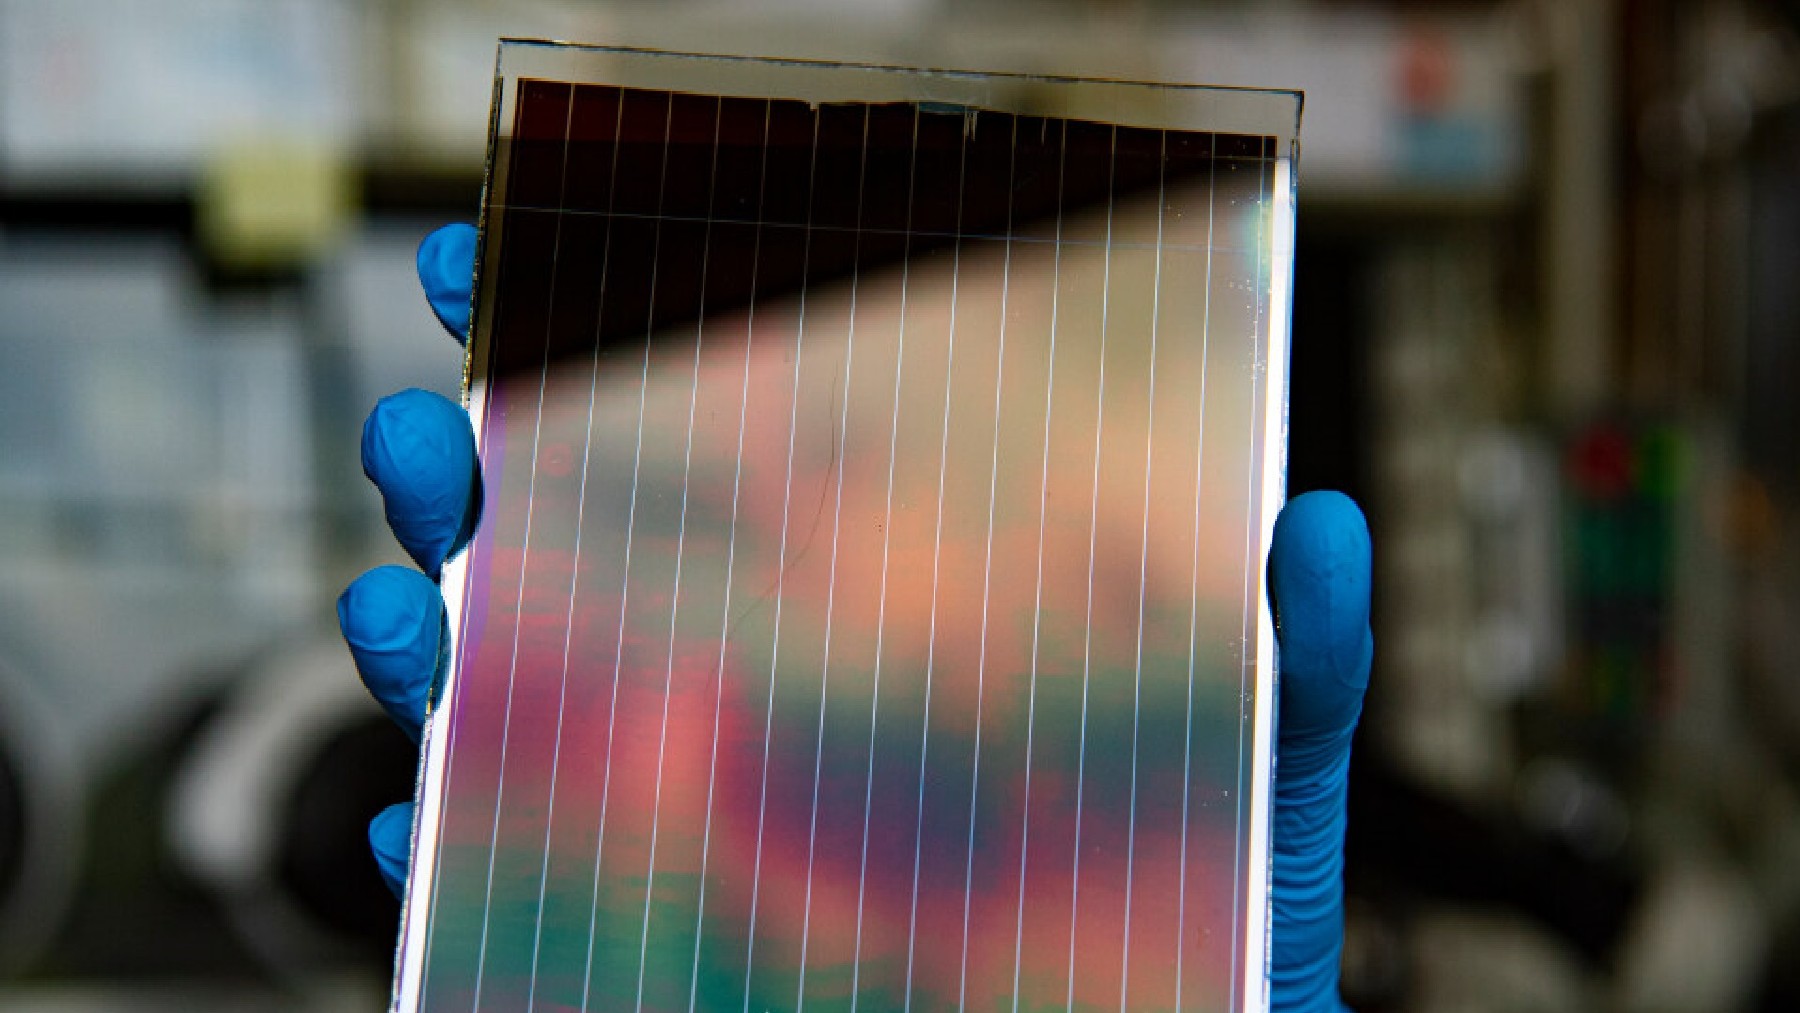 The new material that will multiply the power of solar panels: we use it every day and did not know its potential - ECONews